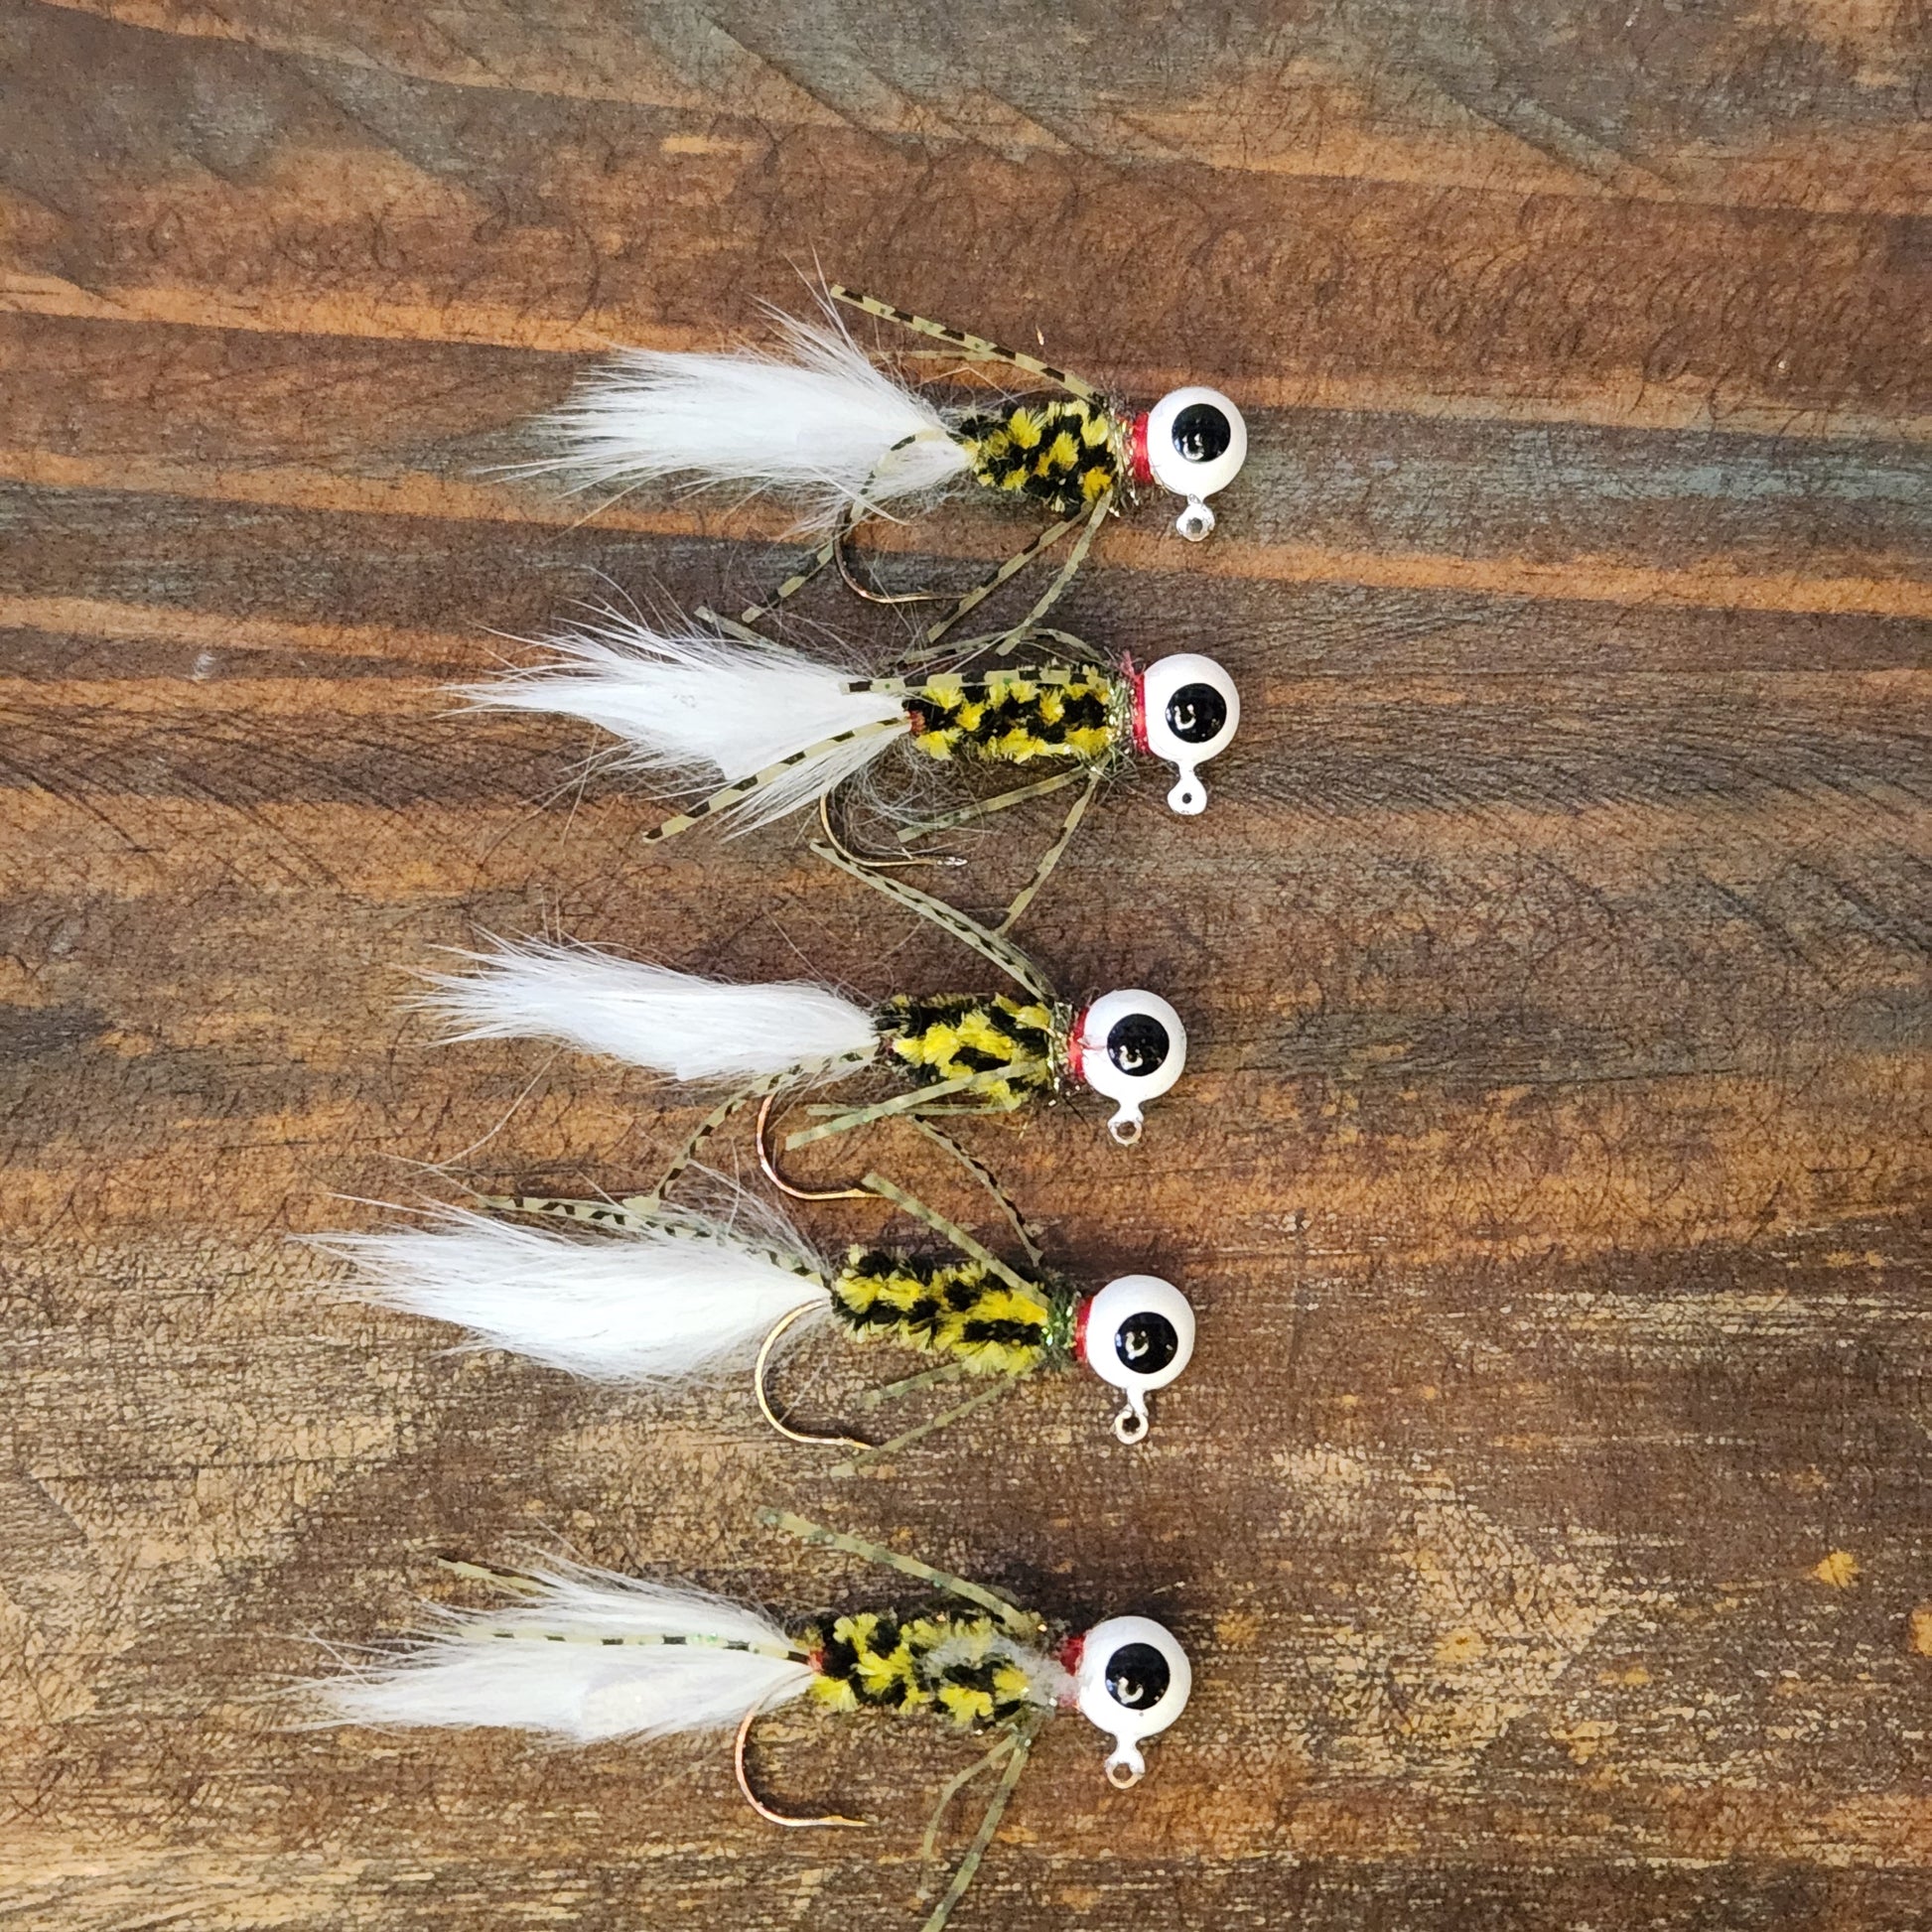 5 pack of the Crappie Crawler 1/16 or 1/8 ounce Crappie Jigs